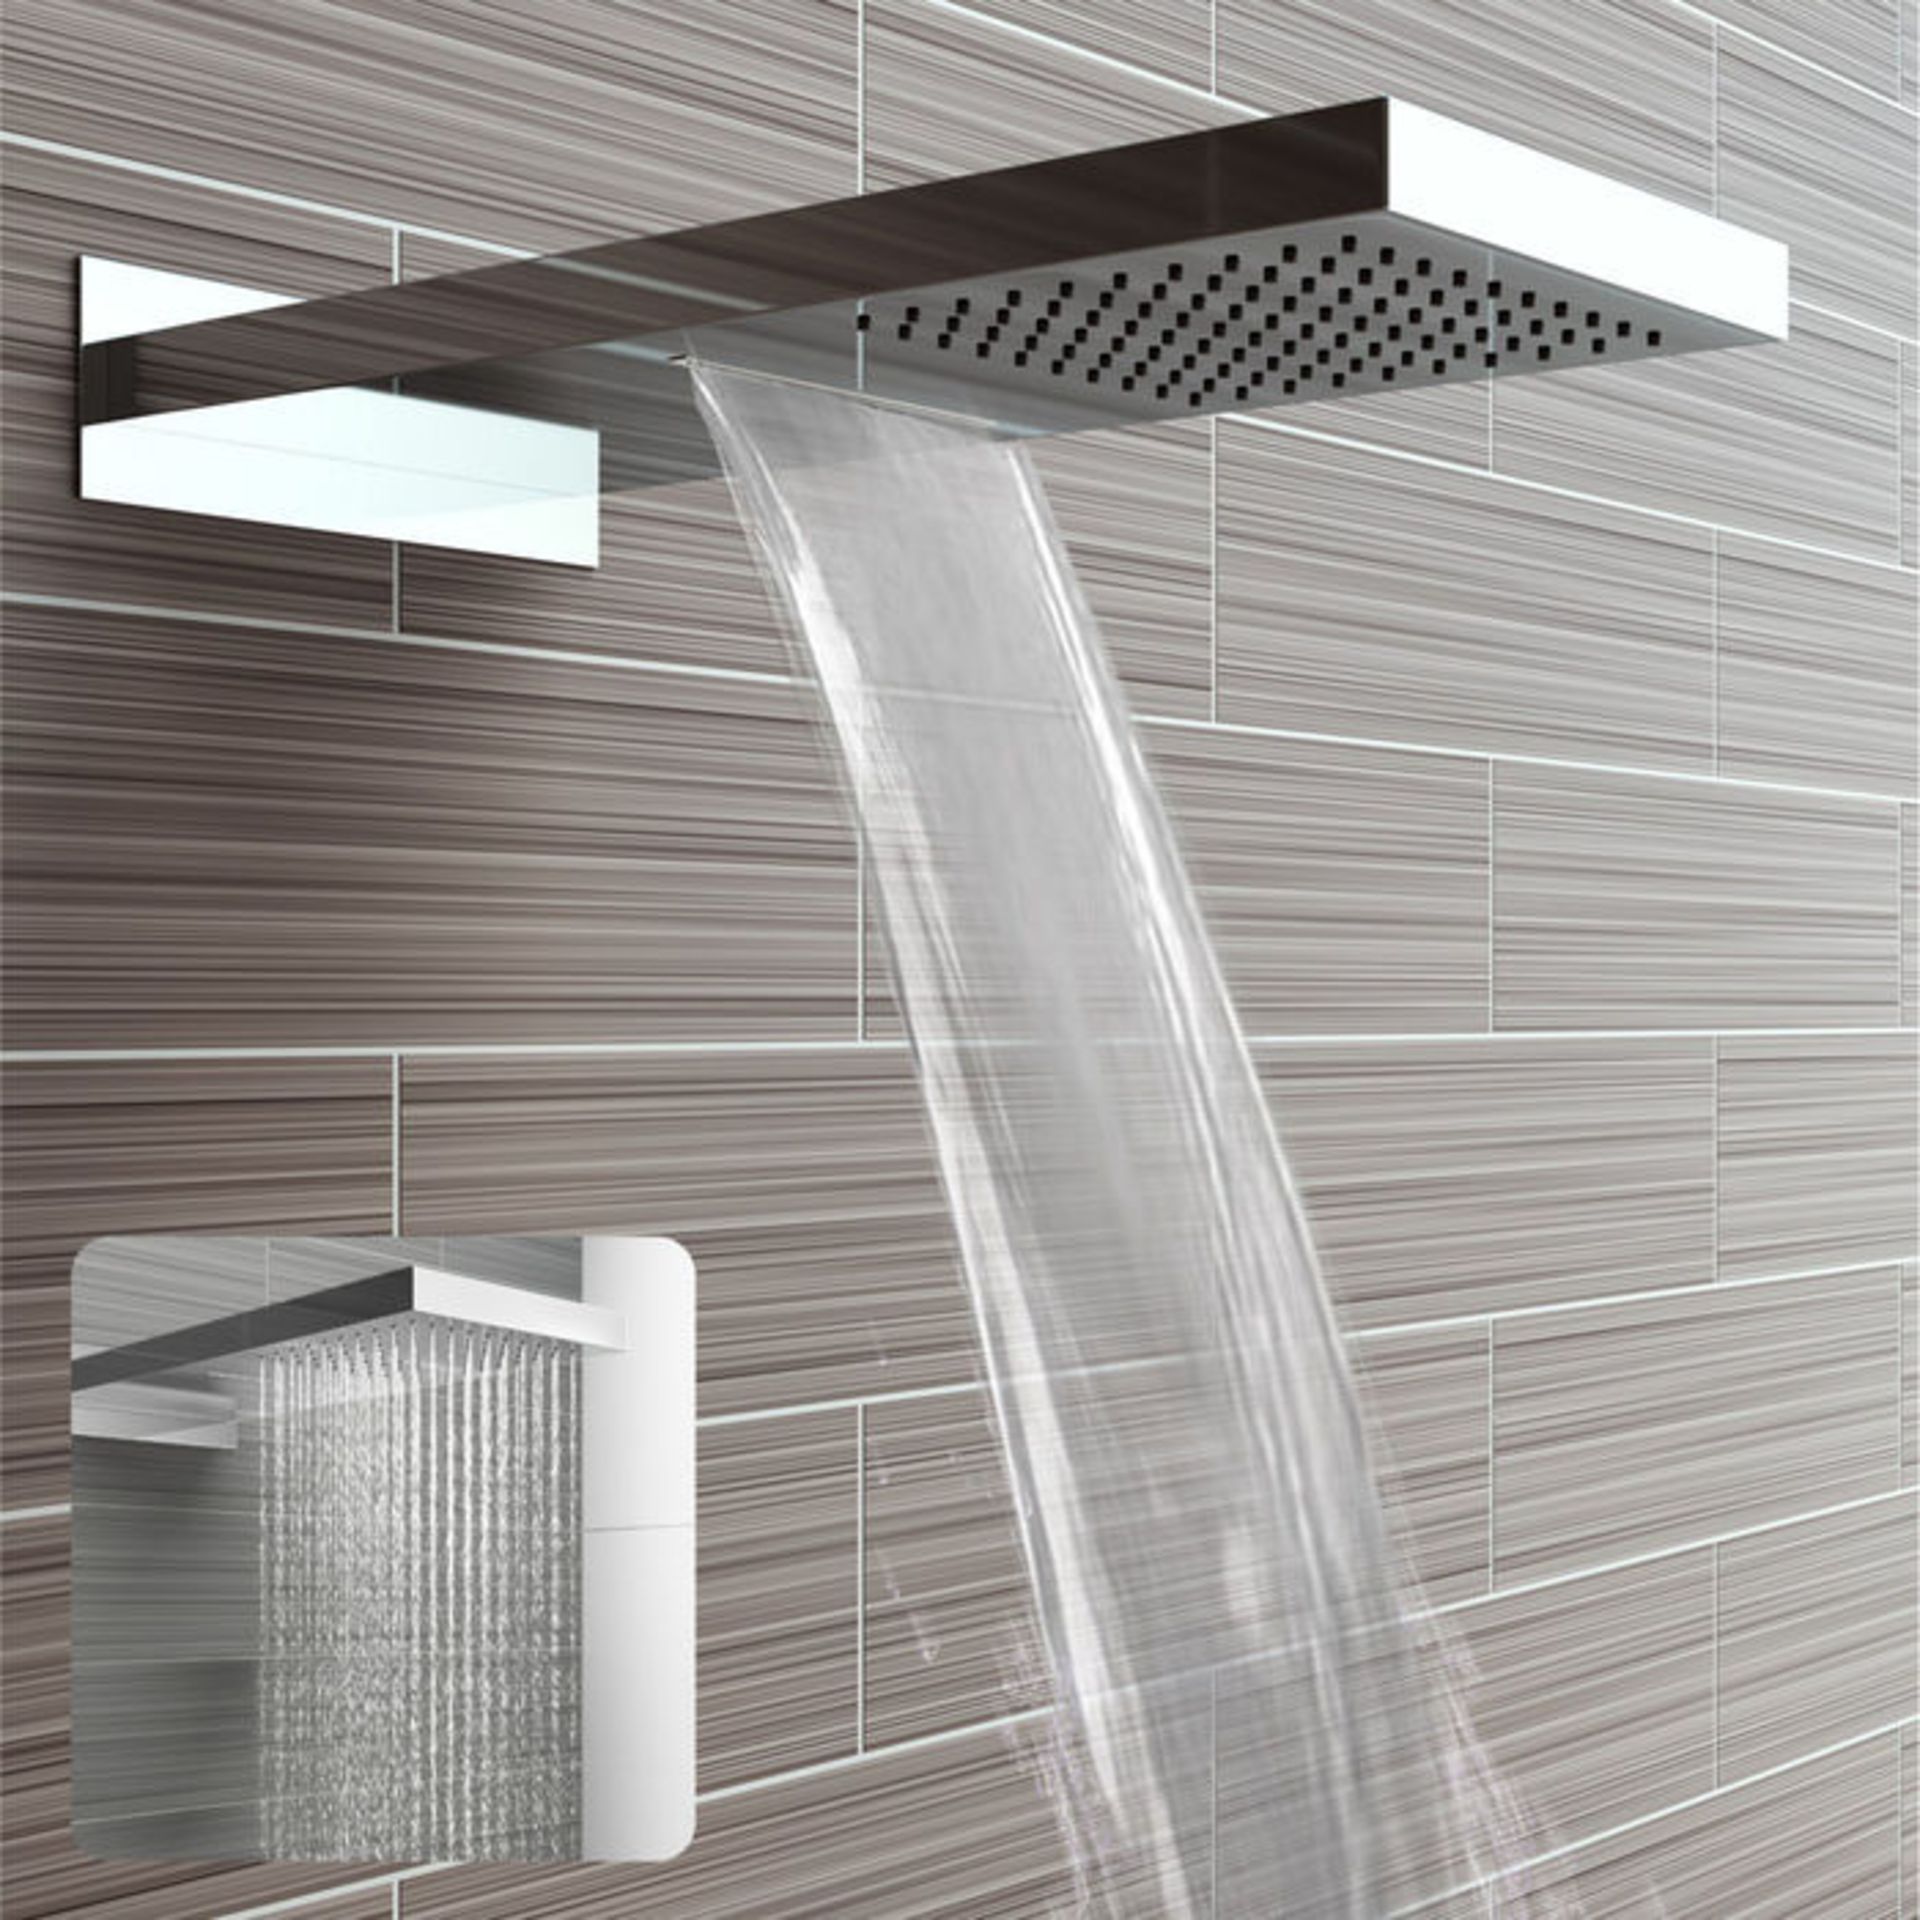 (S92) Stainless Steel 230x500mm Waterfall Shower Head. RRP £374.99 Dual function waterfall and - Bild 2 aus 6